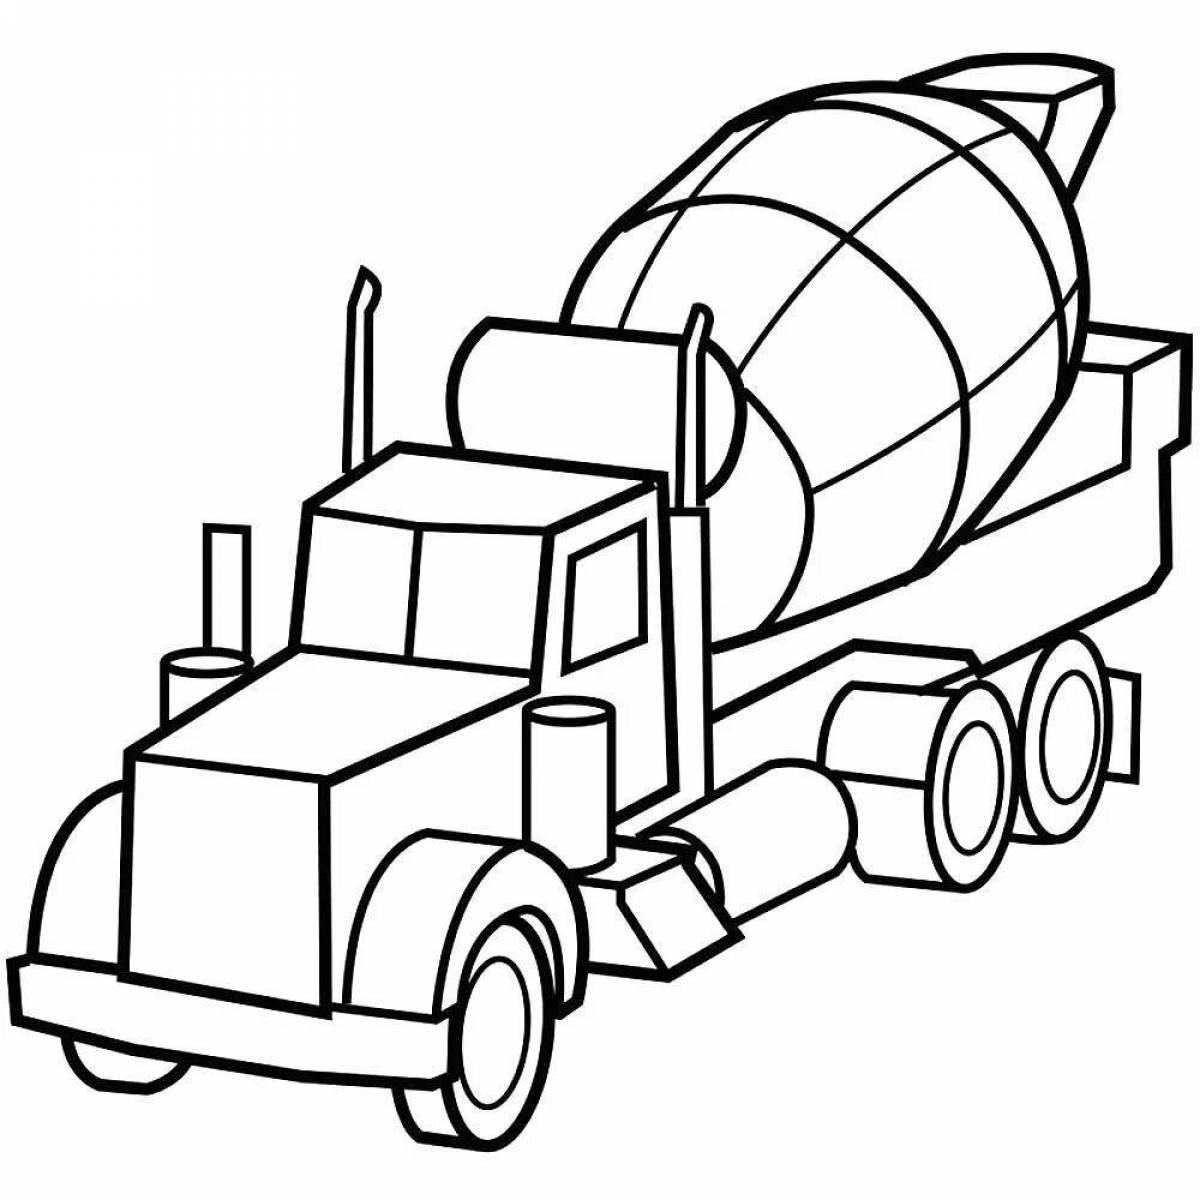 Adorable working machines coloring page